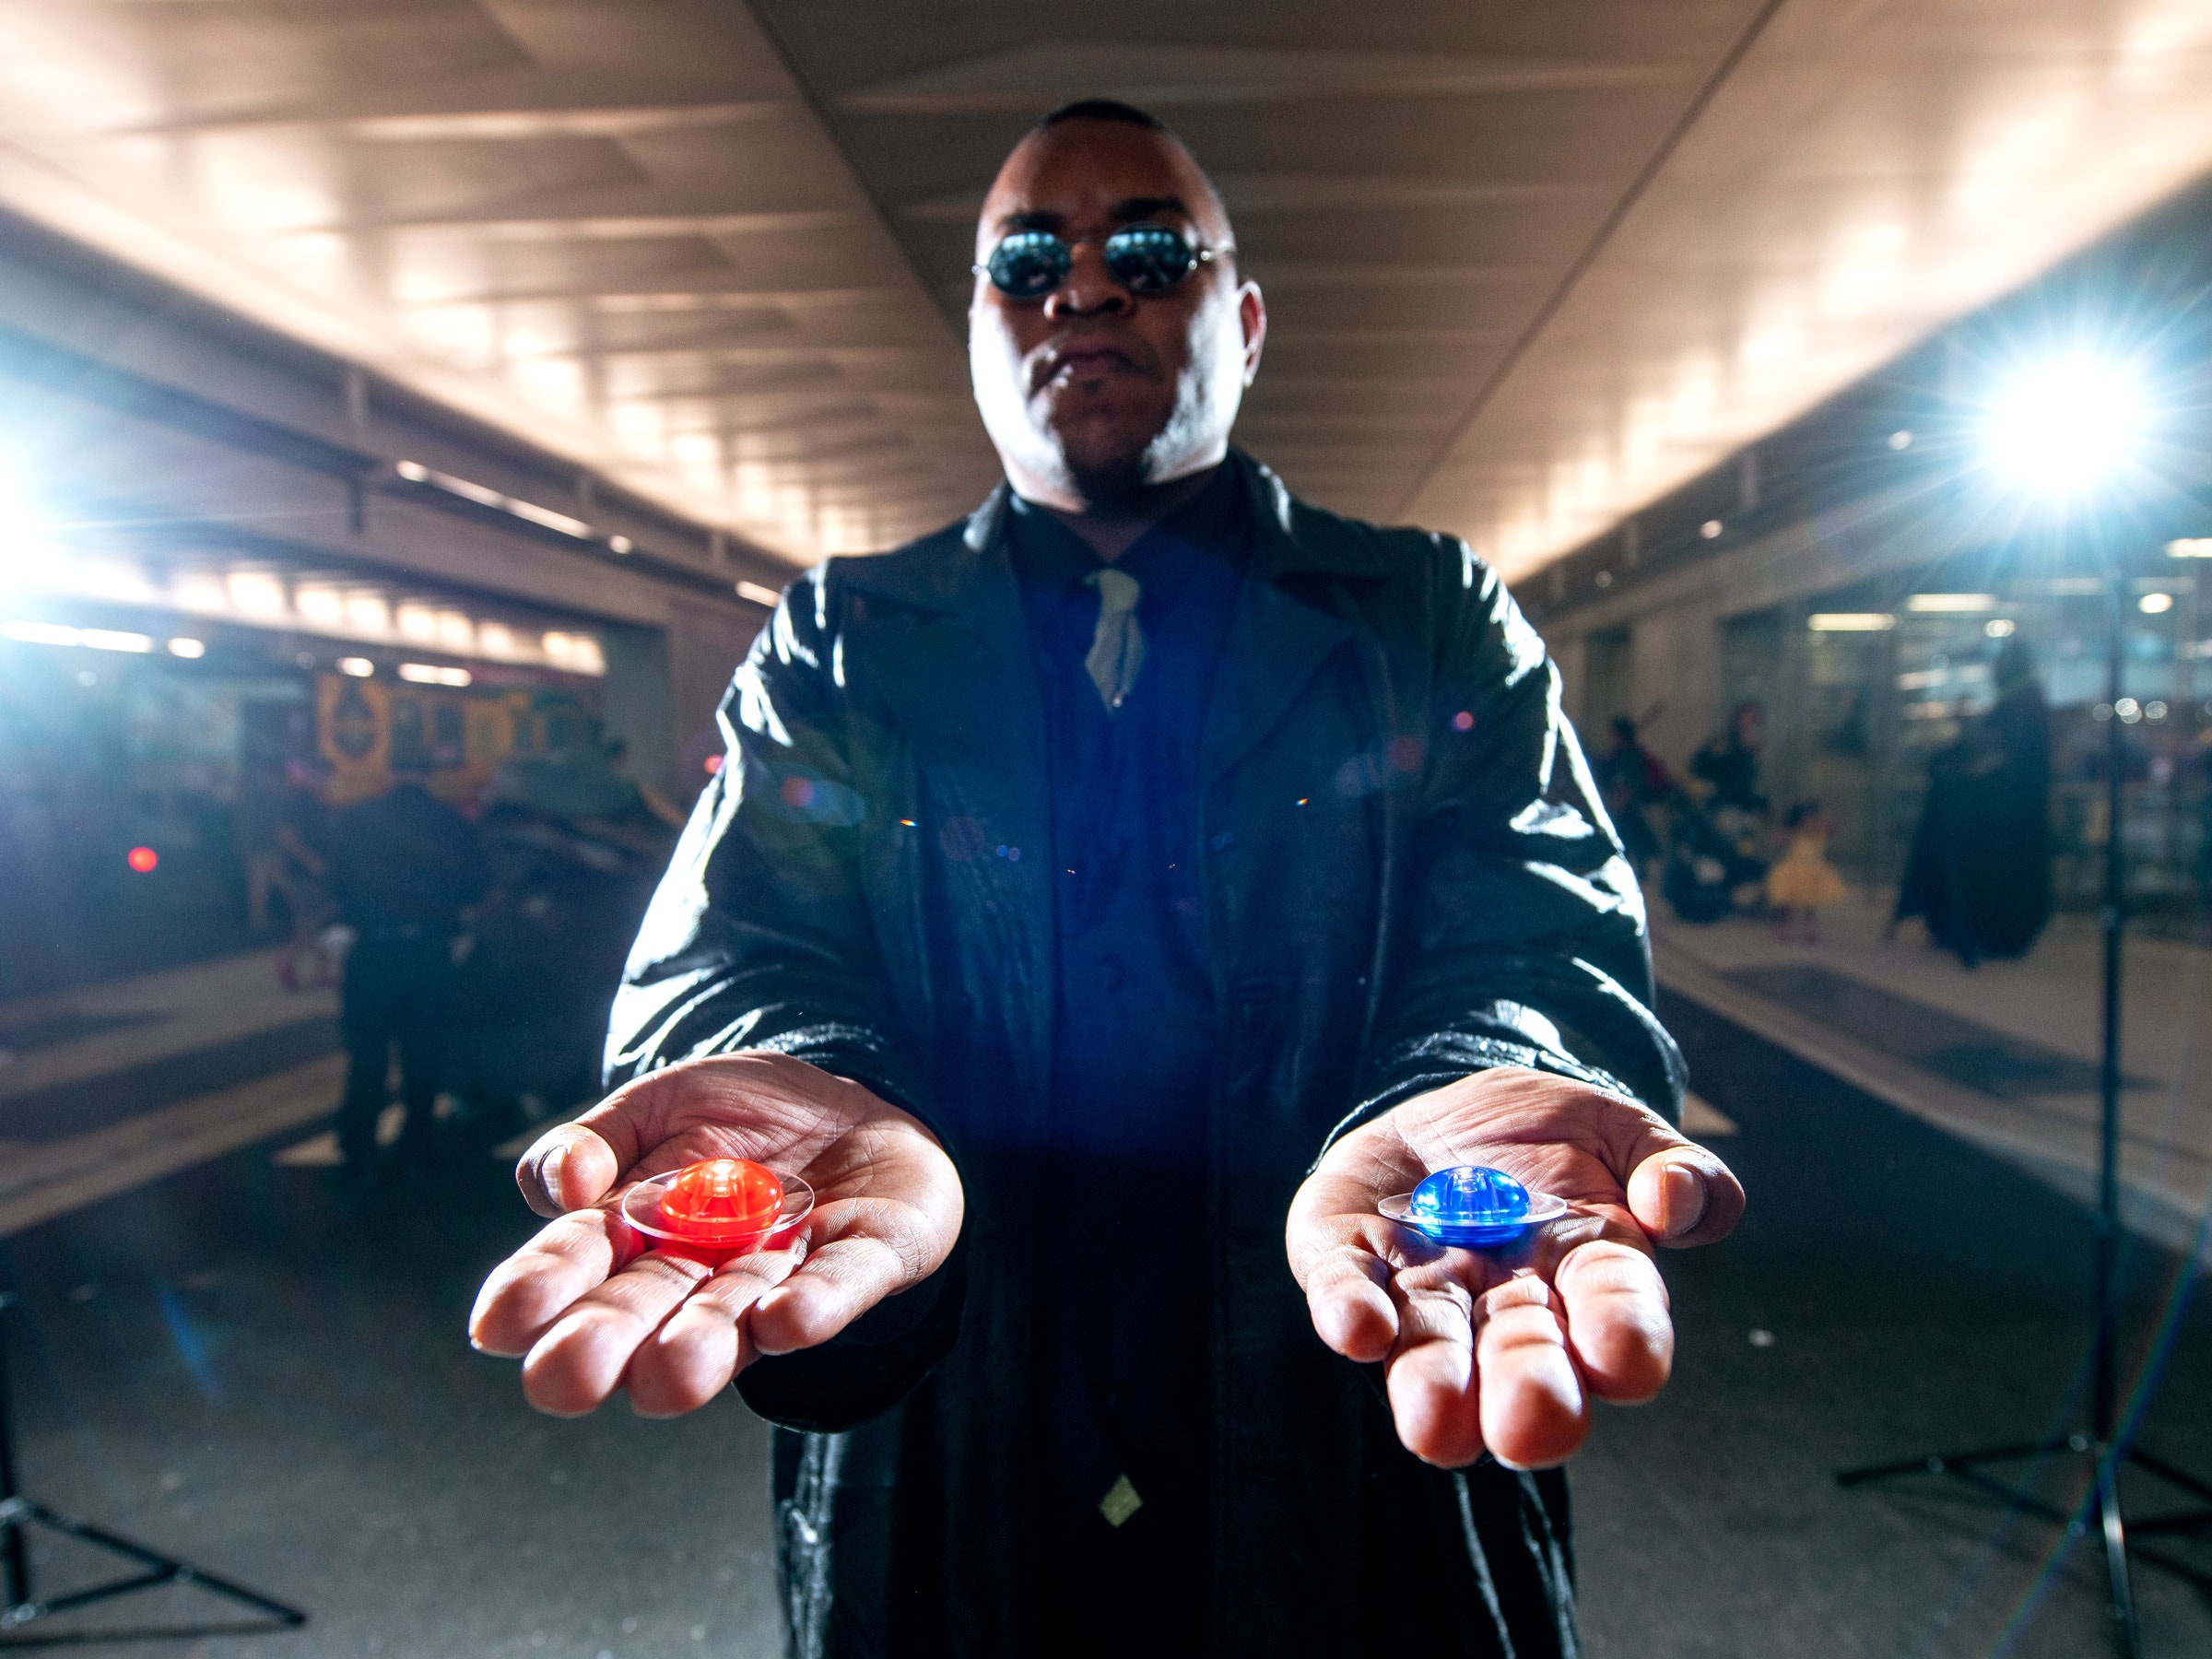 red pill or blue pill?